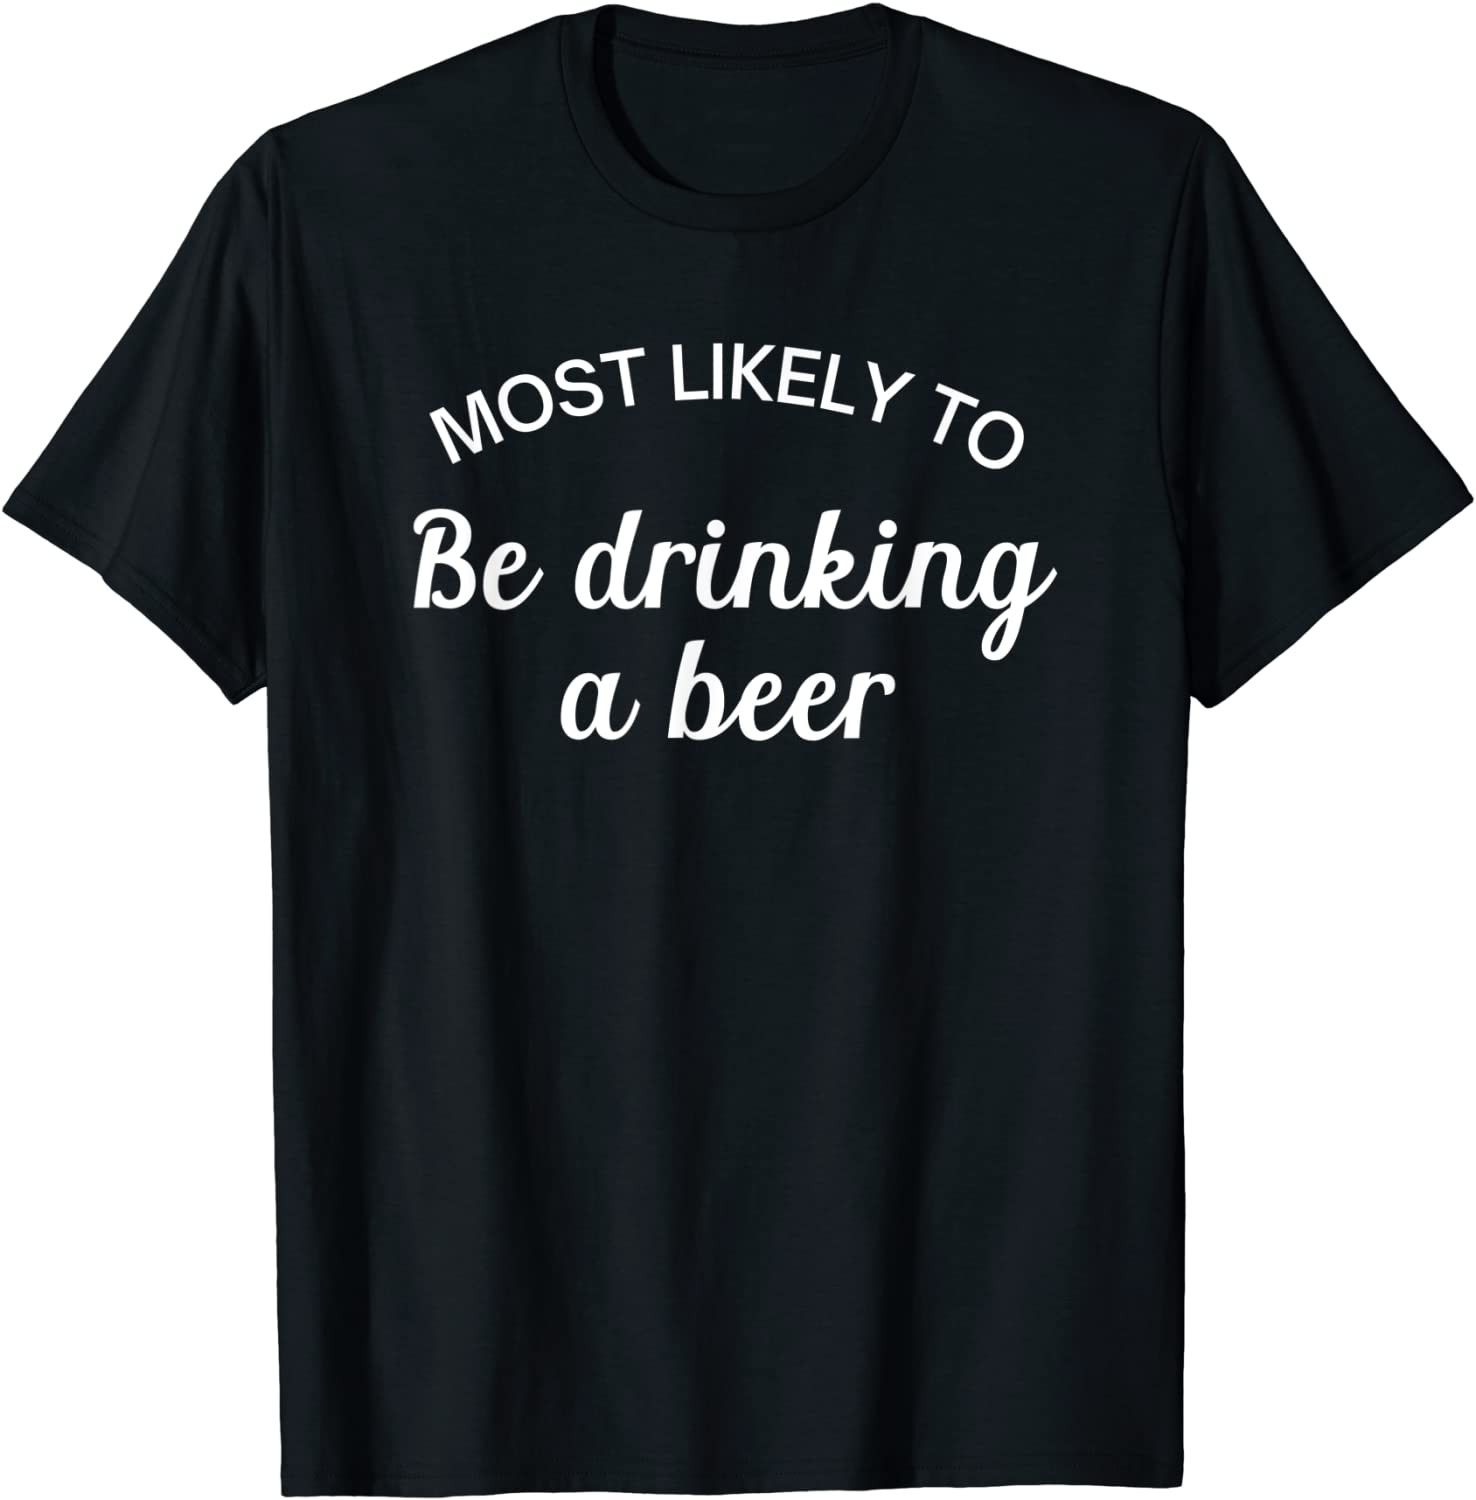 Most Likely To Be Drinking A Beer T-Shirt